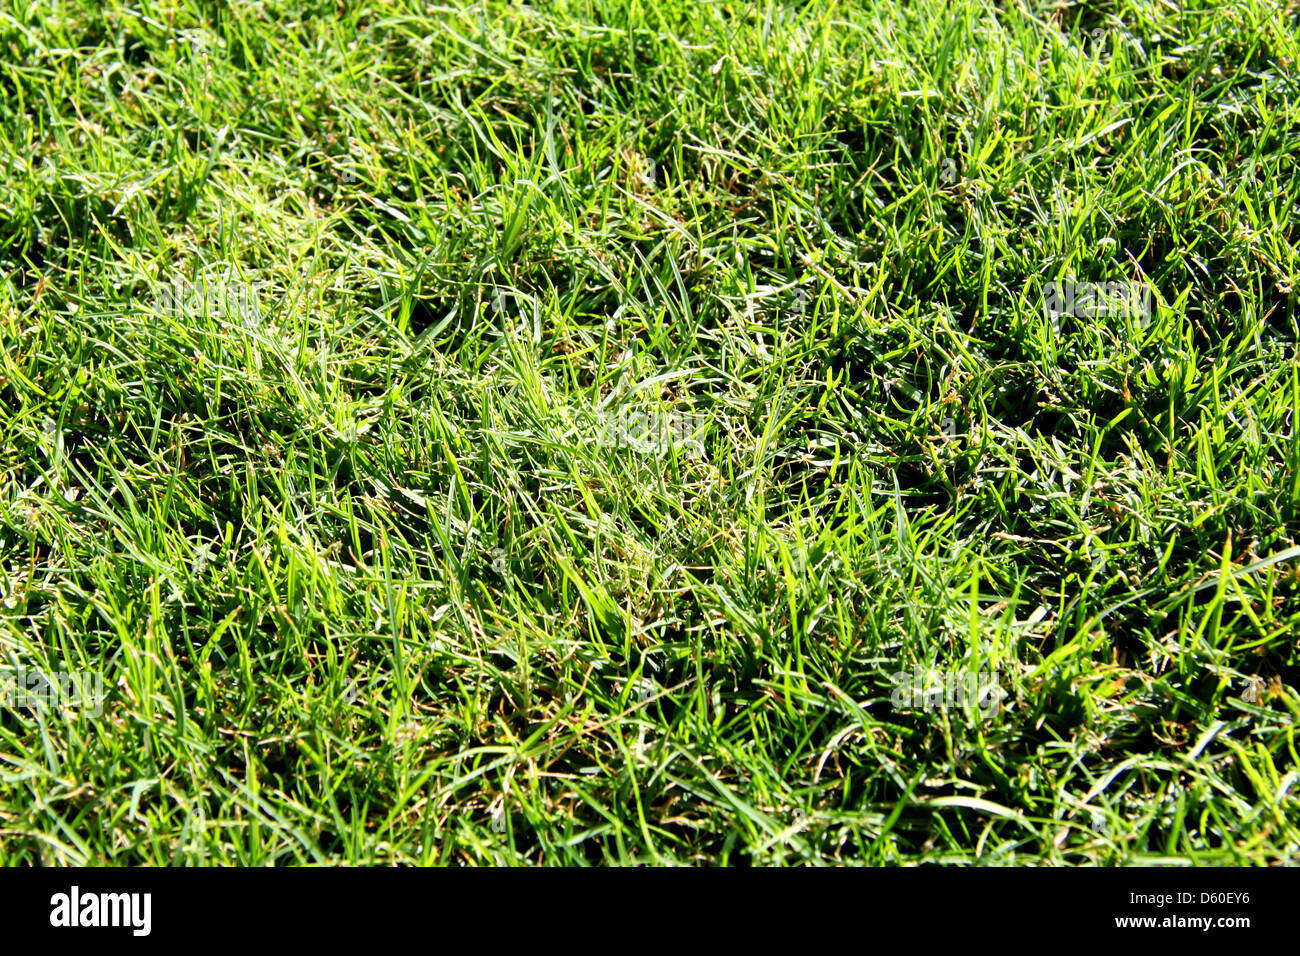 texture of the green grass lawn Stock Photo